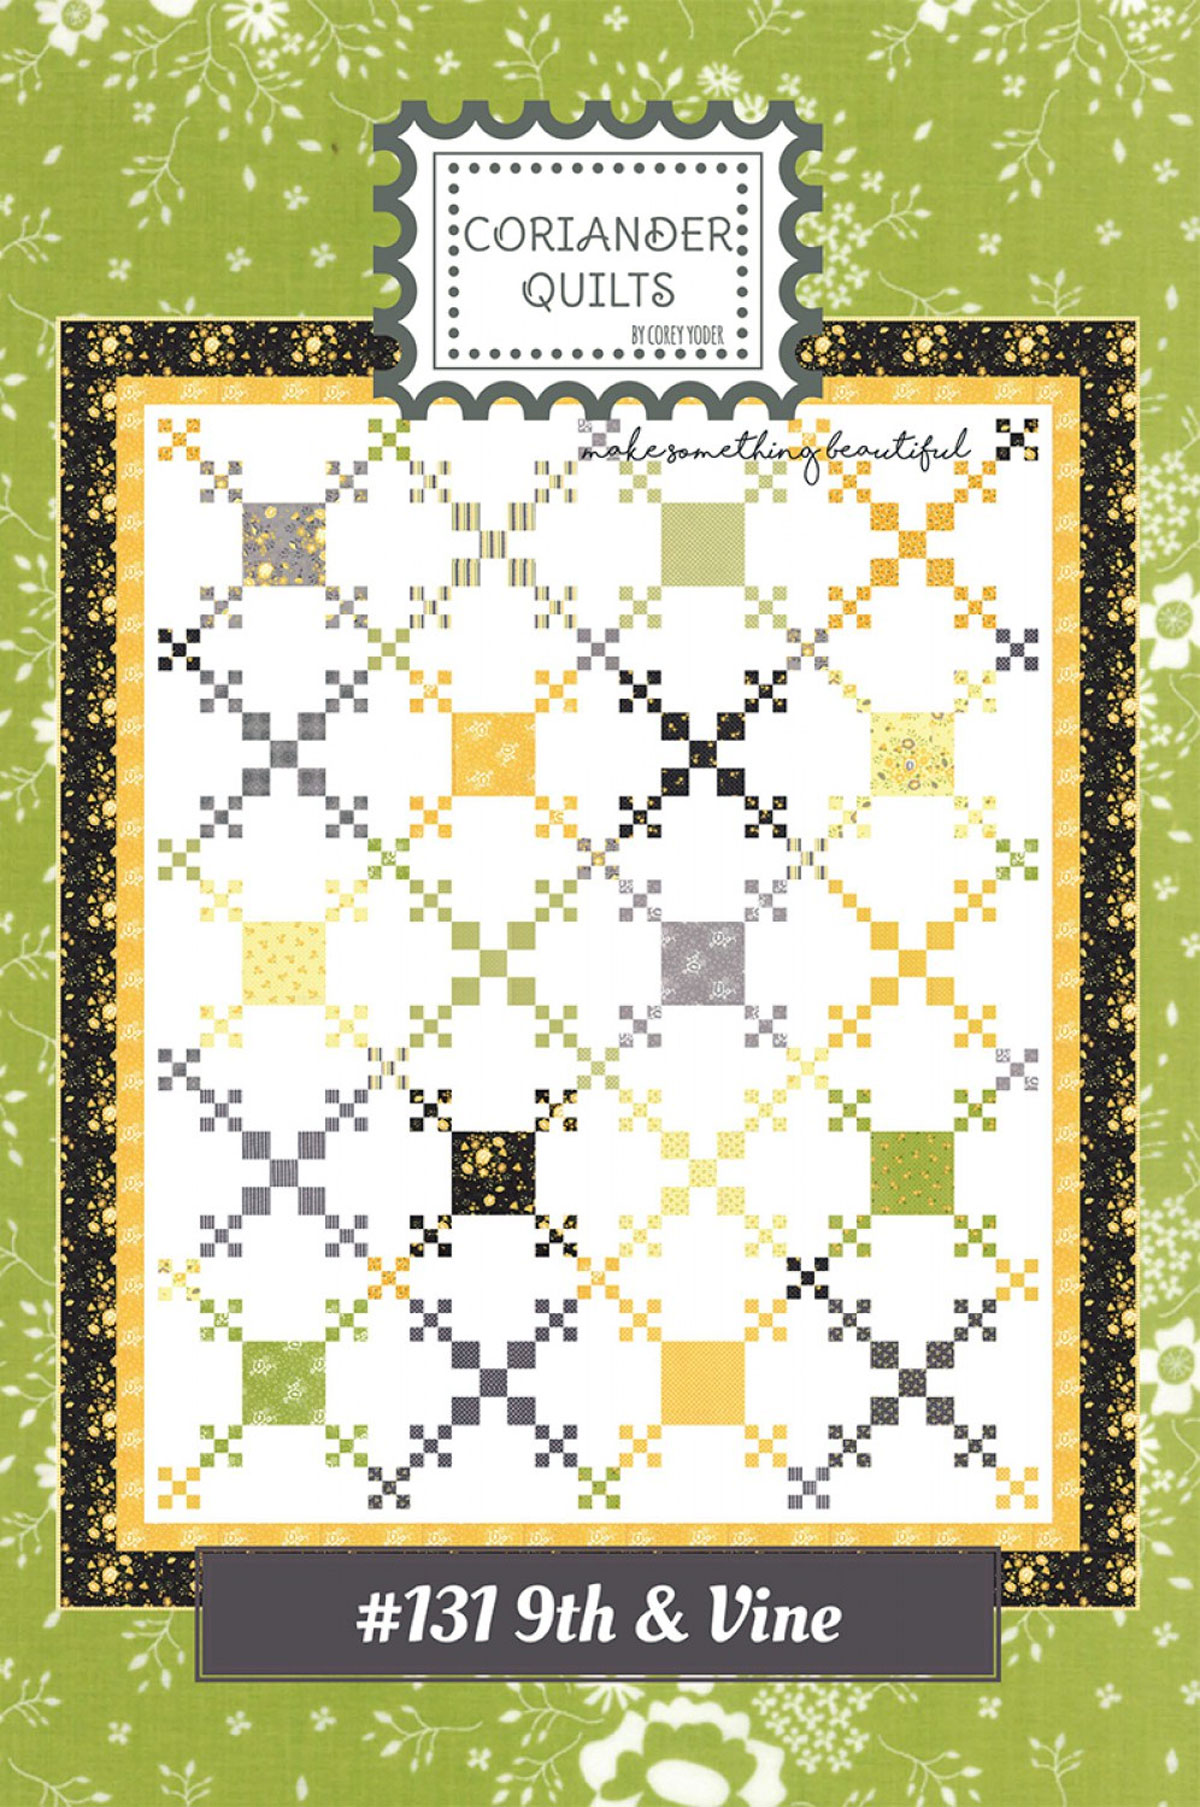 9th-and-Vine-quilt-sewing-pattern-Coriander-Quilts-front